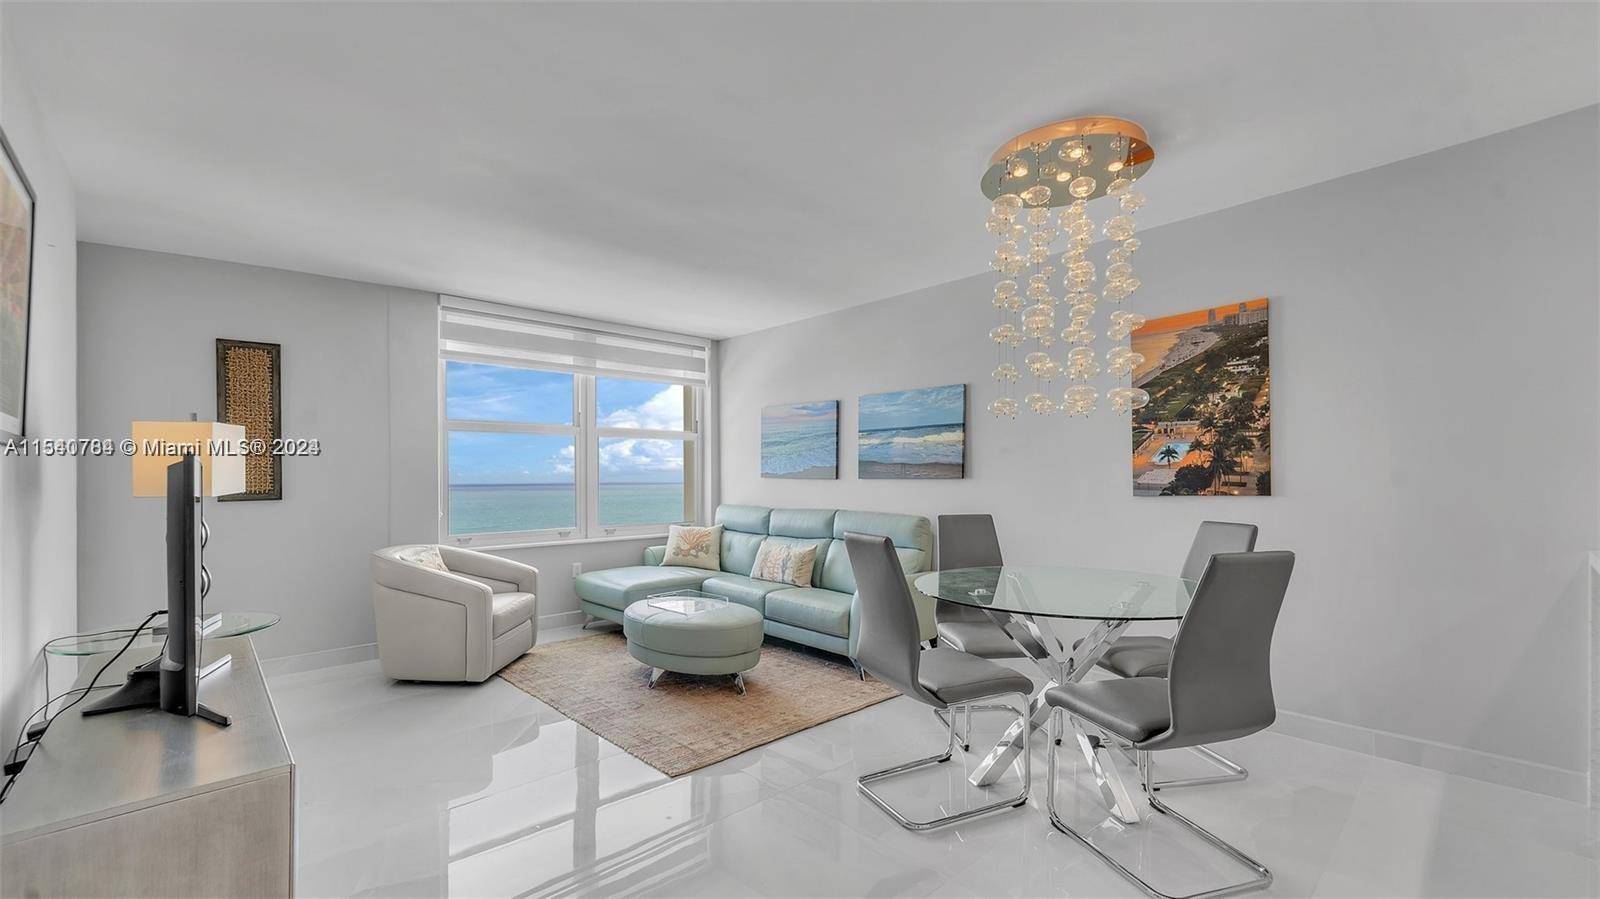 Beachfront One Bedroom. Completely renovated spacious 775sq ft plus guest bath balcony, direct oceanfront east views.